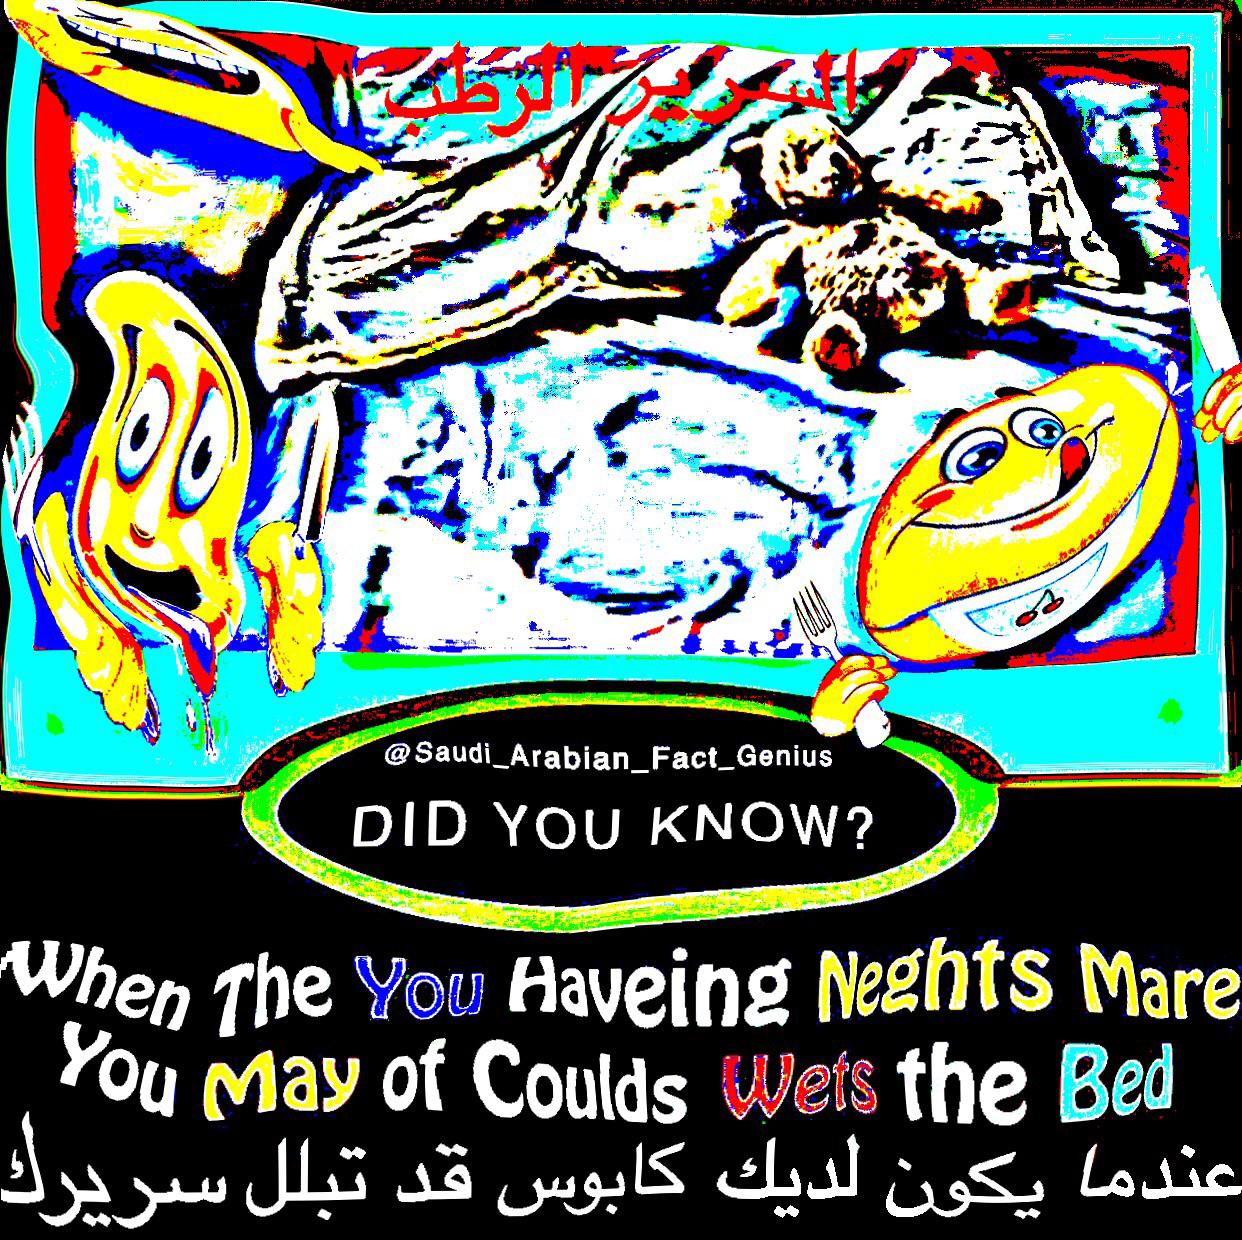 deep-fried deep-fried-memes deep-fried text: @Saudi_Arabian_Fact_Genius DID You KNOW? Haveing Negfits Mare When The YOU Yoa May of Cou(ds the Bed wets 